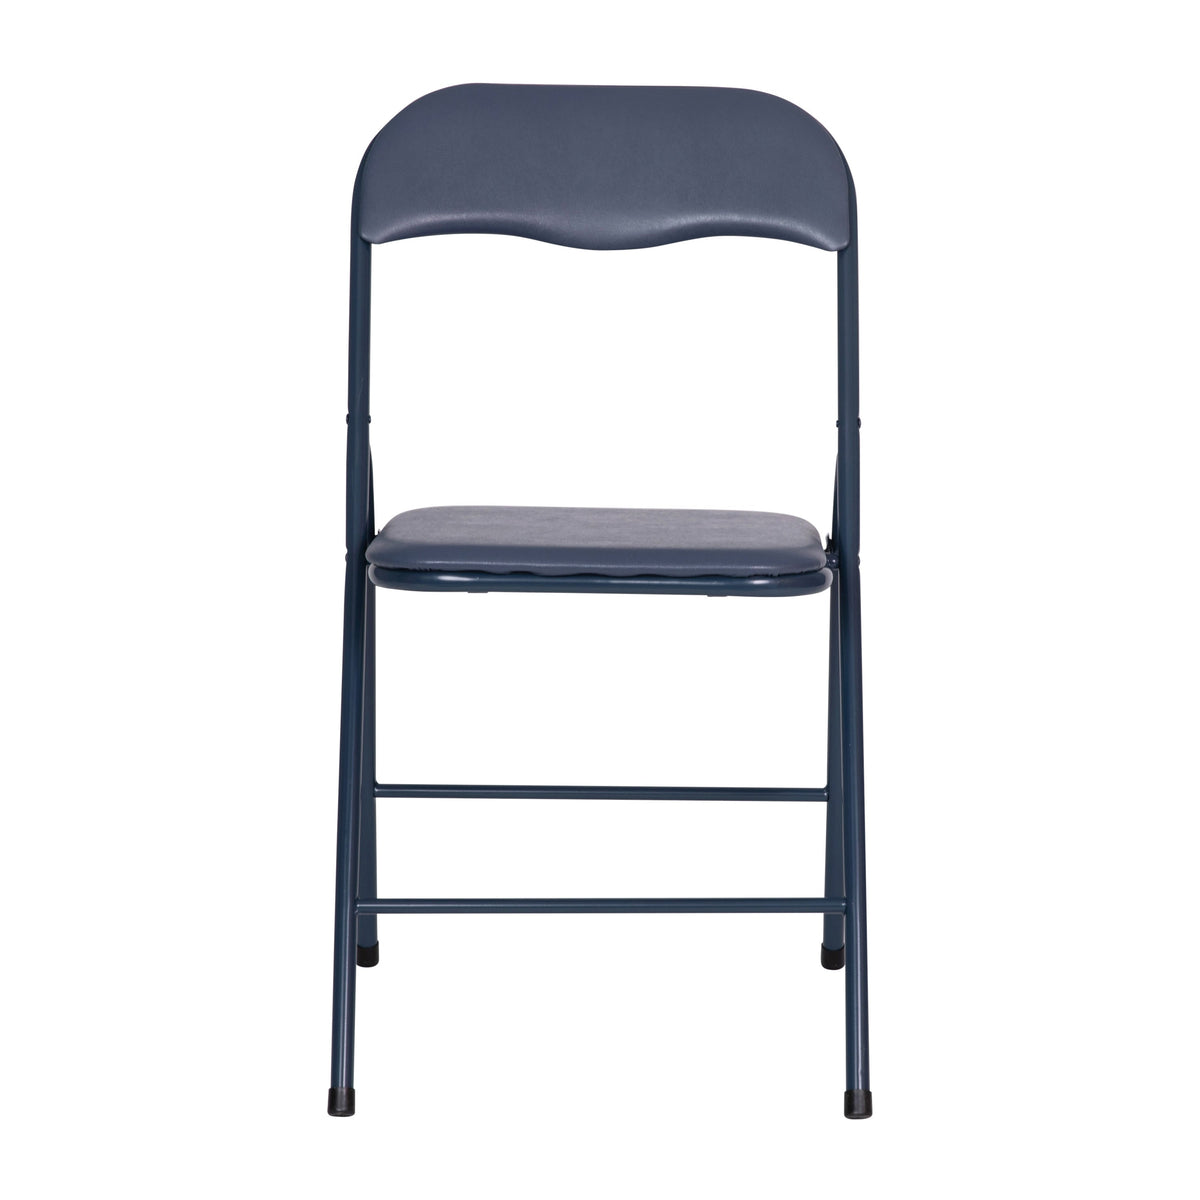 Navy |#| 5 Piece Navy Folding Card Table and Chair Set with Upholstered Table Top